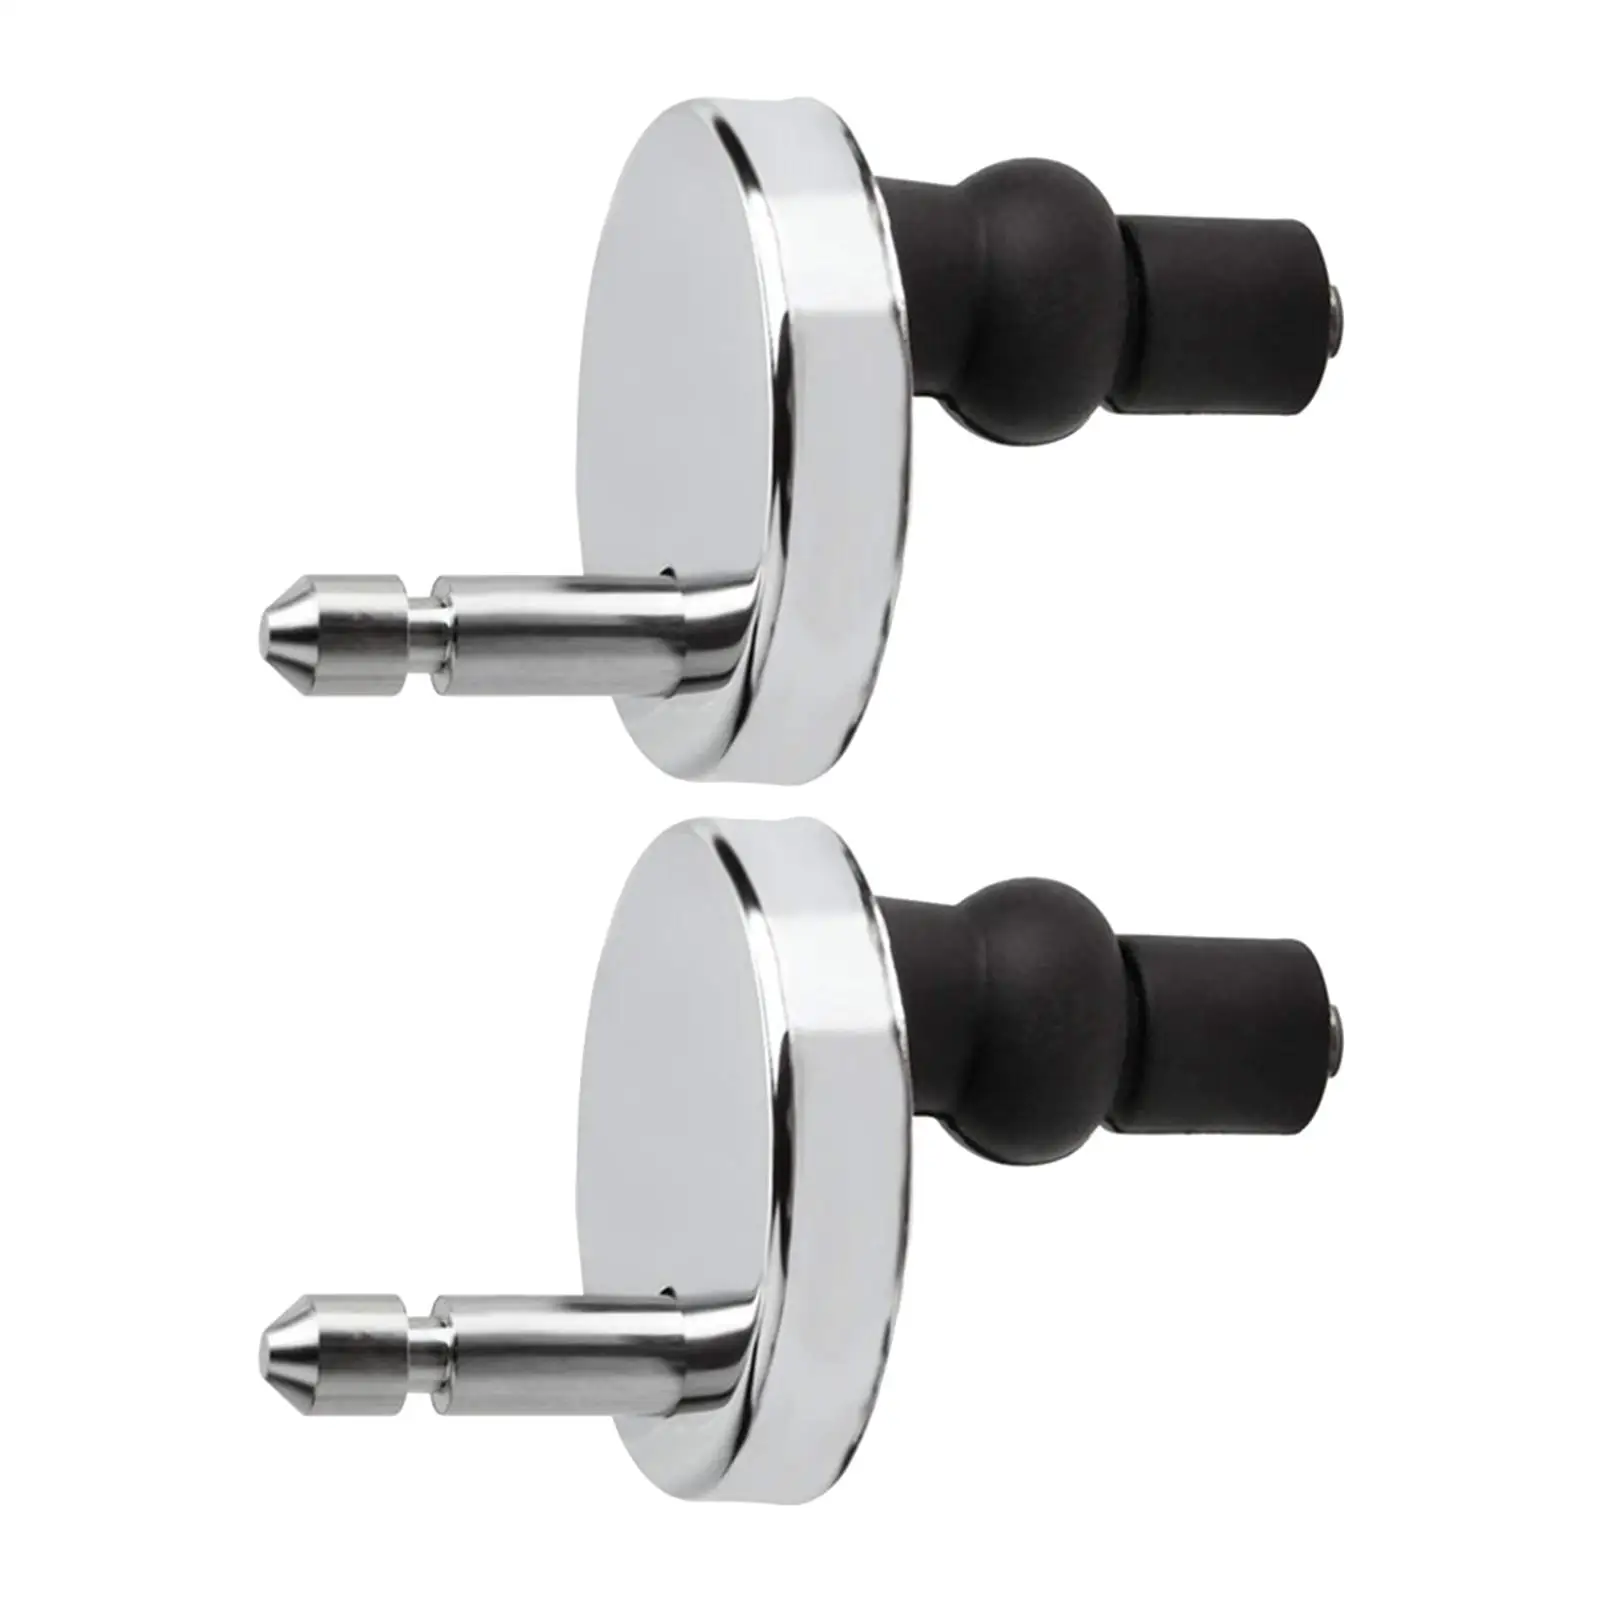 Toilet Seat Hinge Fixings Universal Hole Fixing Rubber Back Heavy Duty Portable Hinges Fittings for Replacement